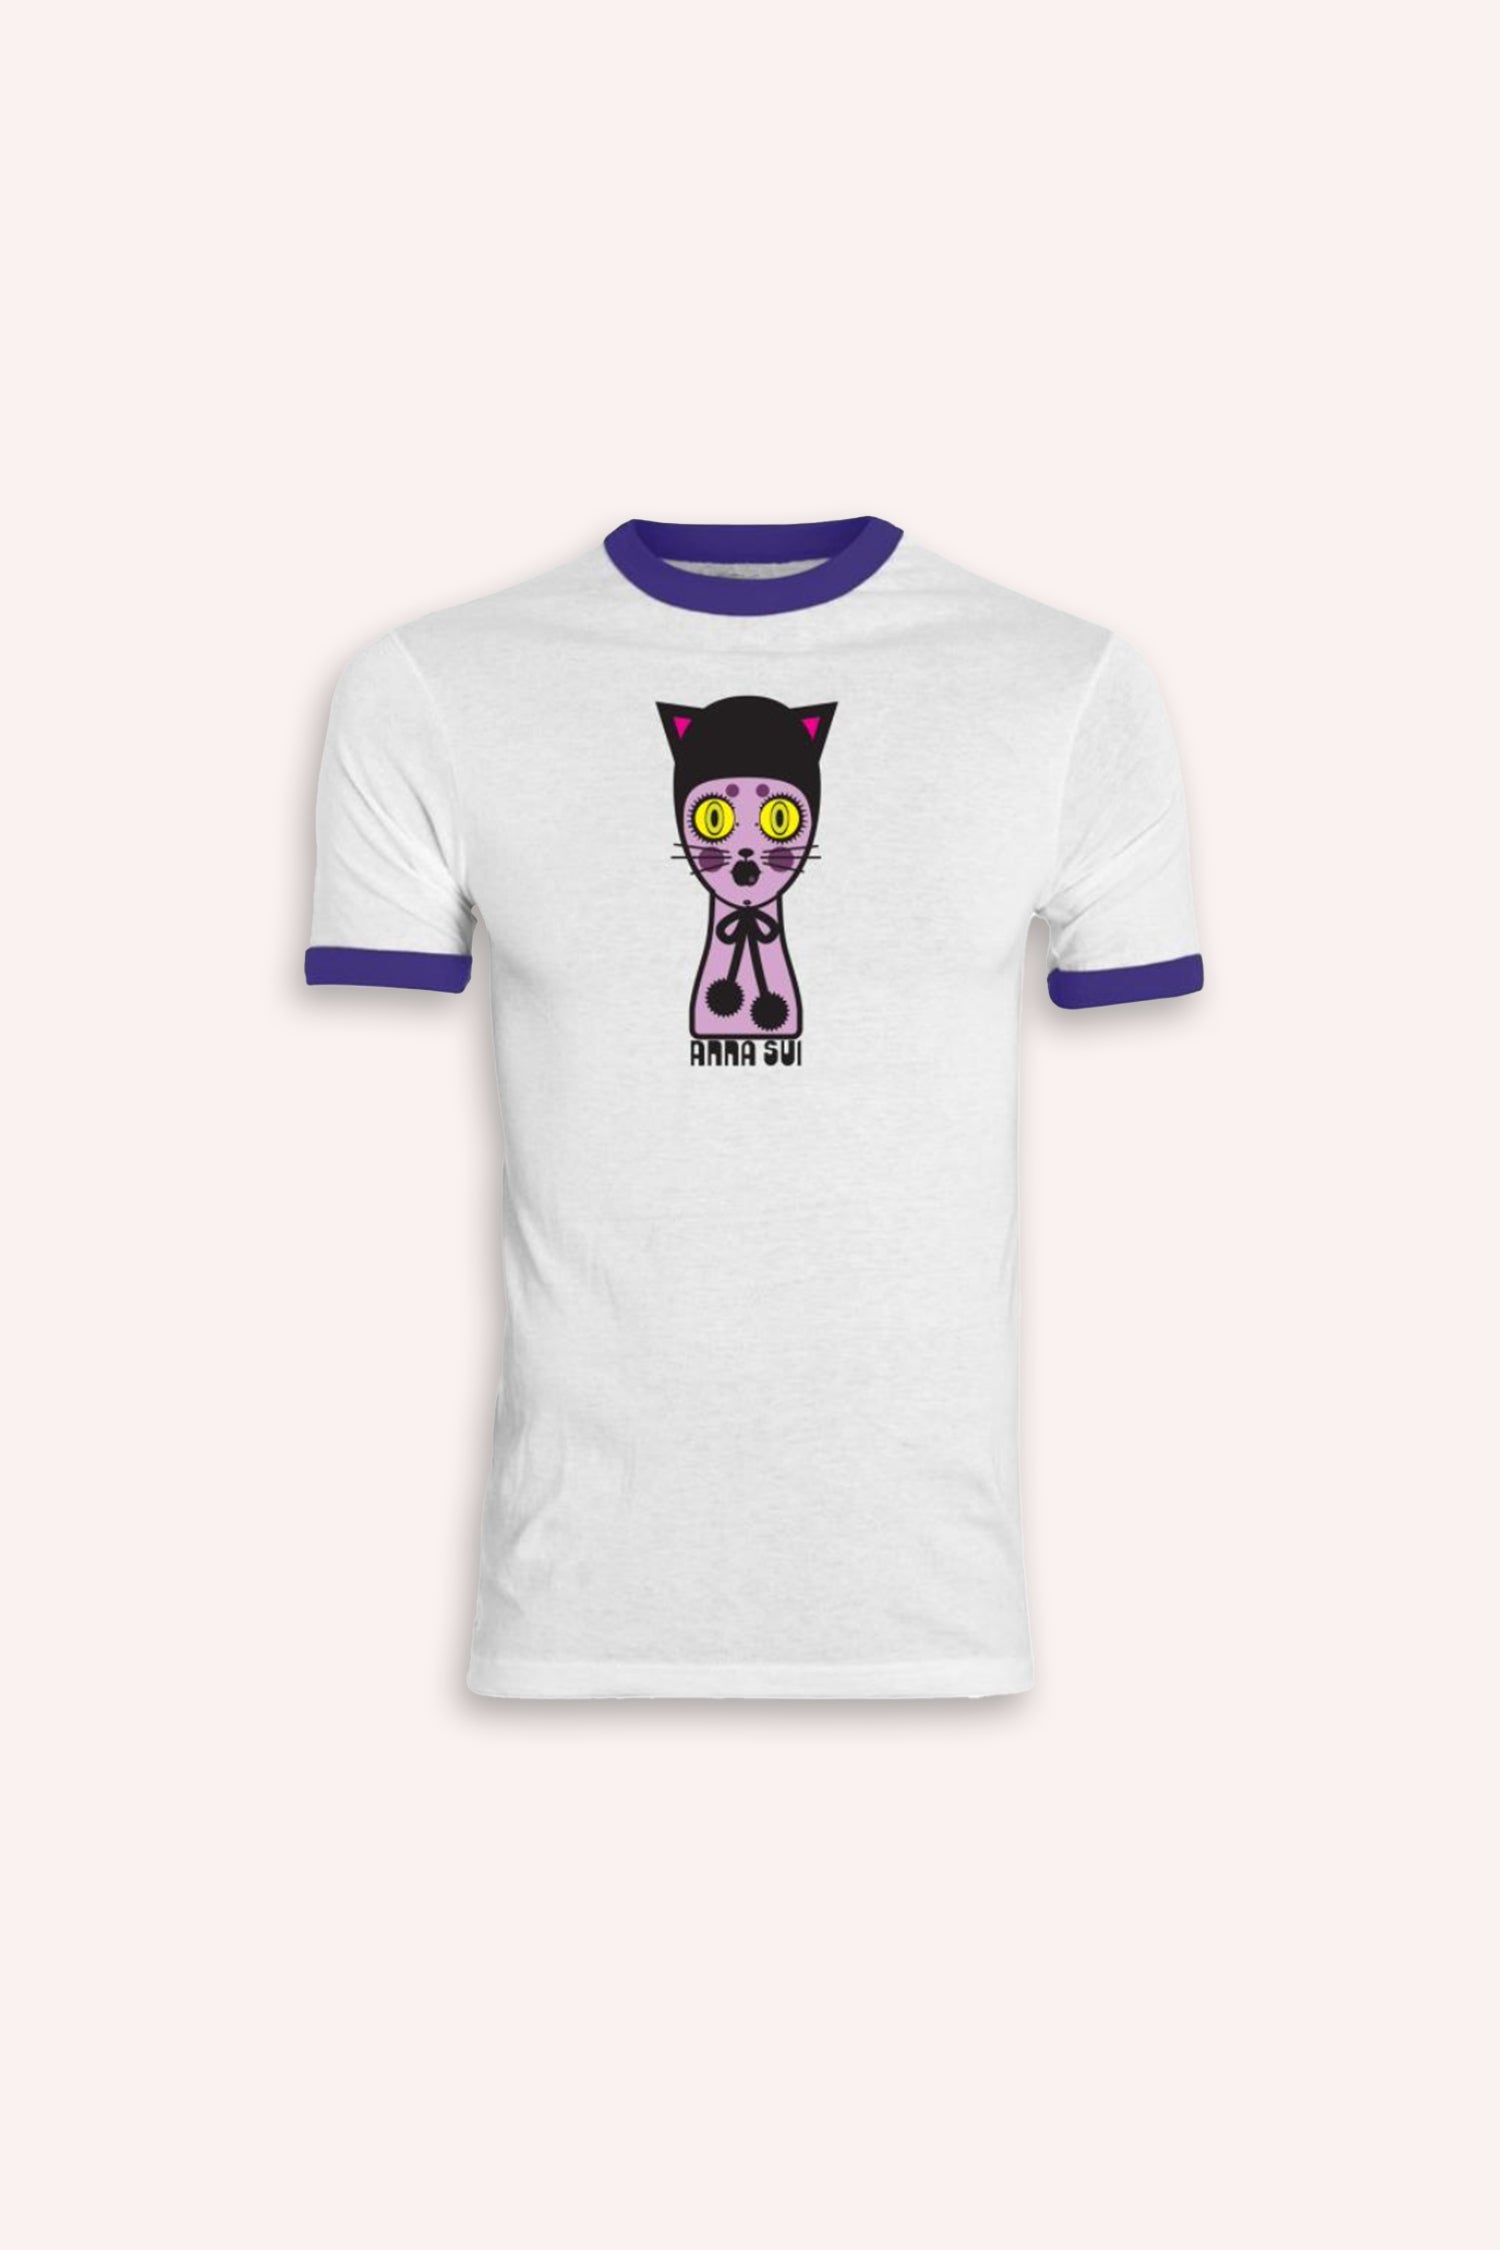 White tee with purple edges collar & arm, print in front representing a purple doll black cat attire